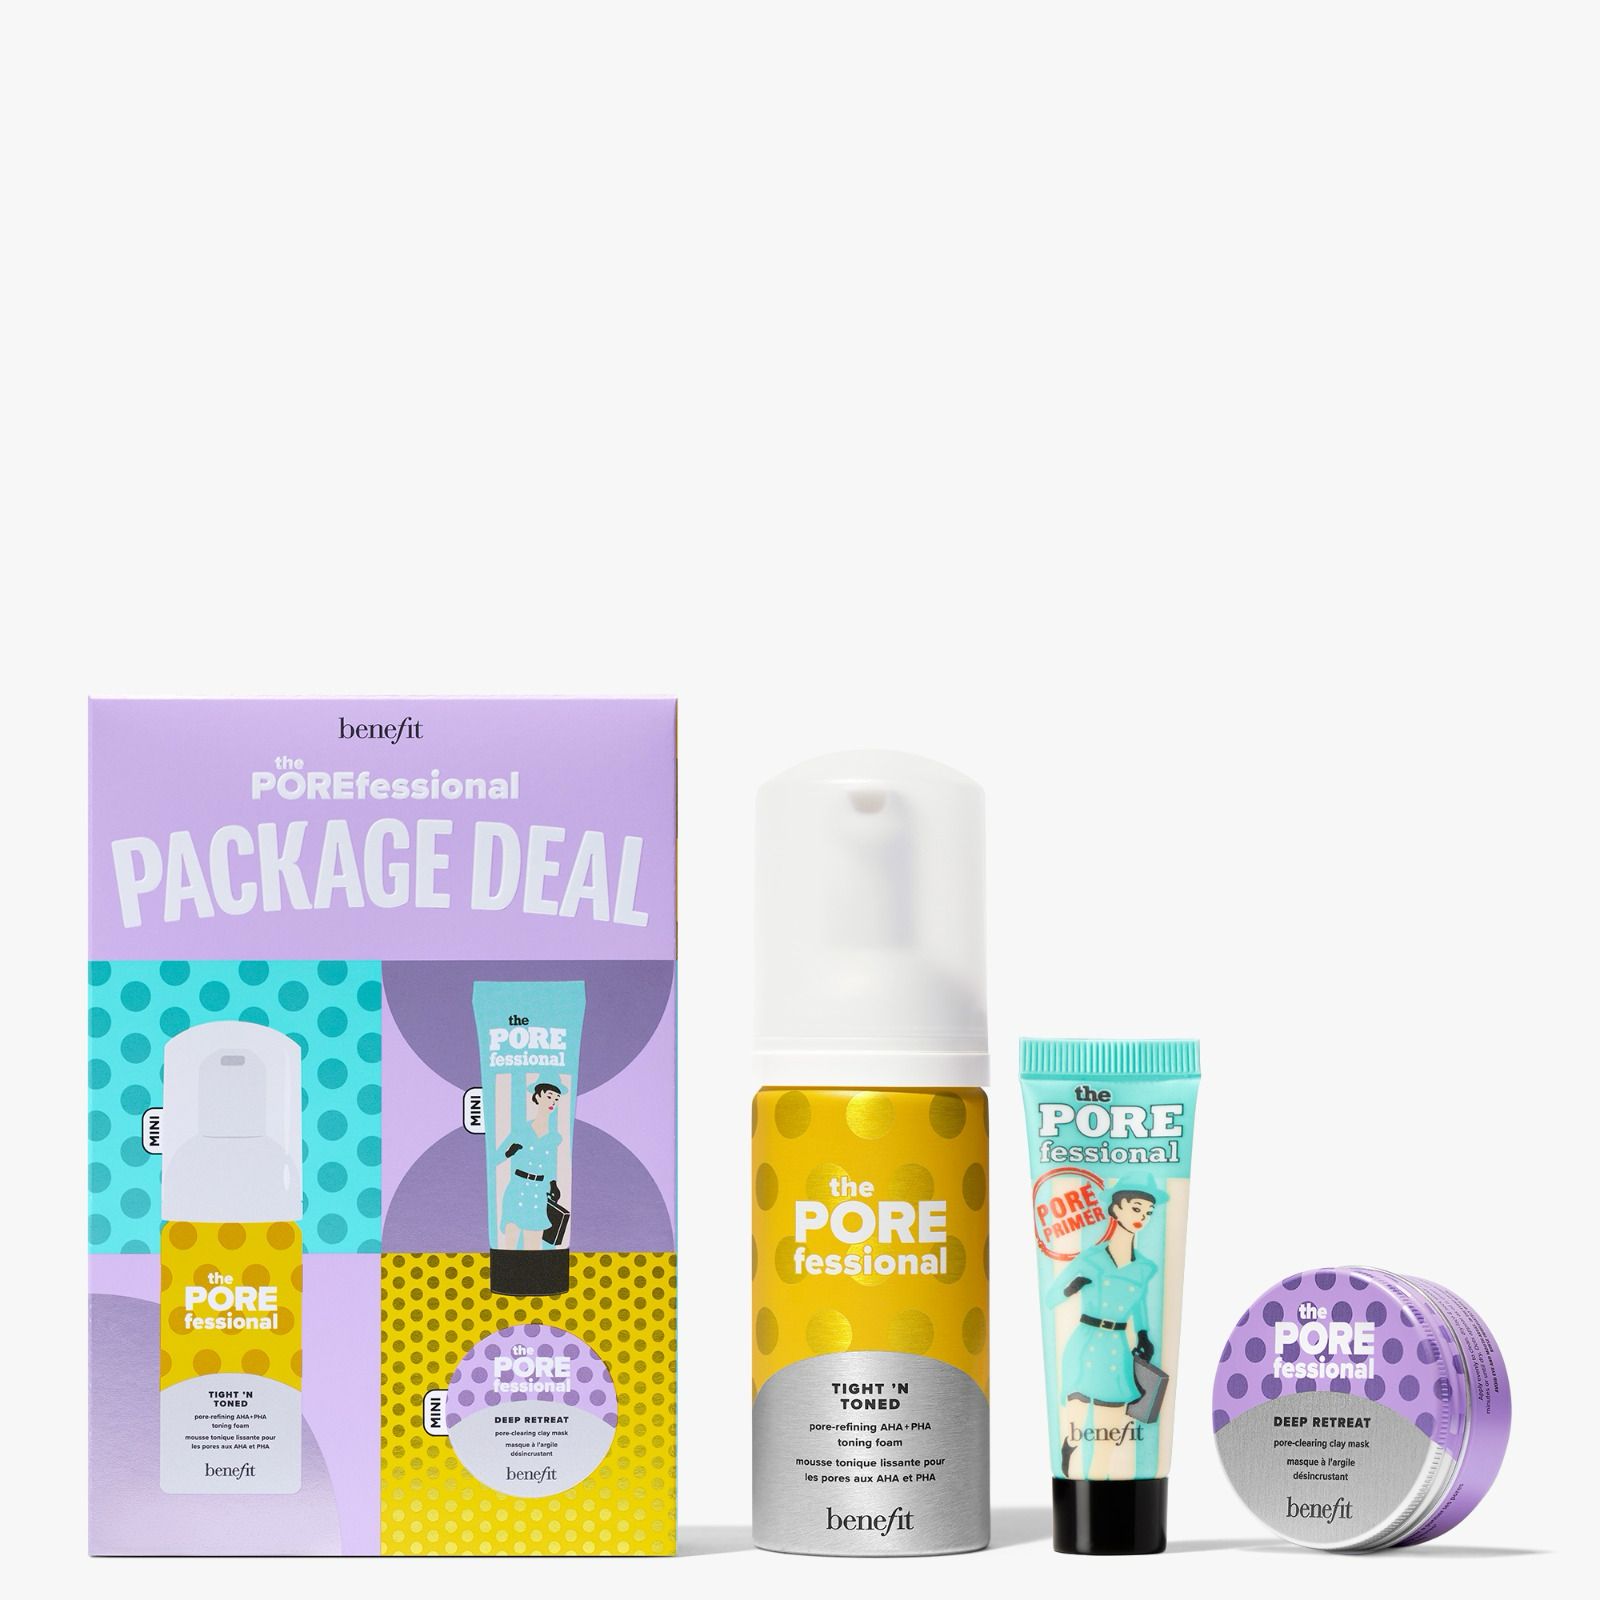 The POREfessional Package Deal